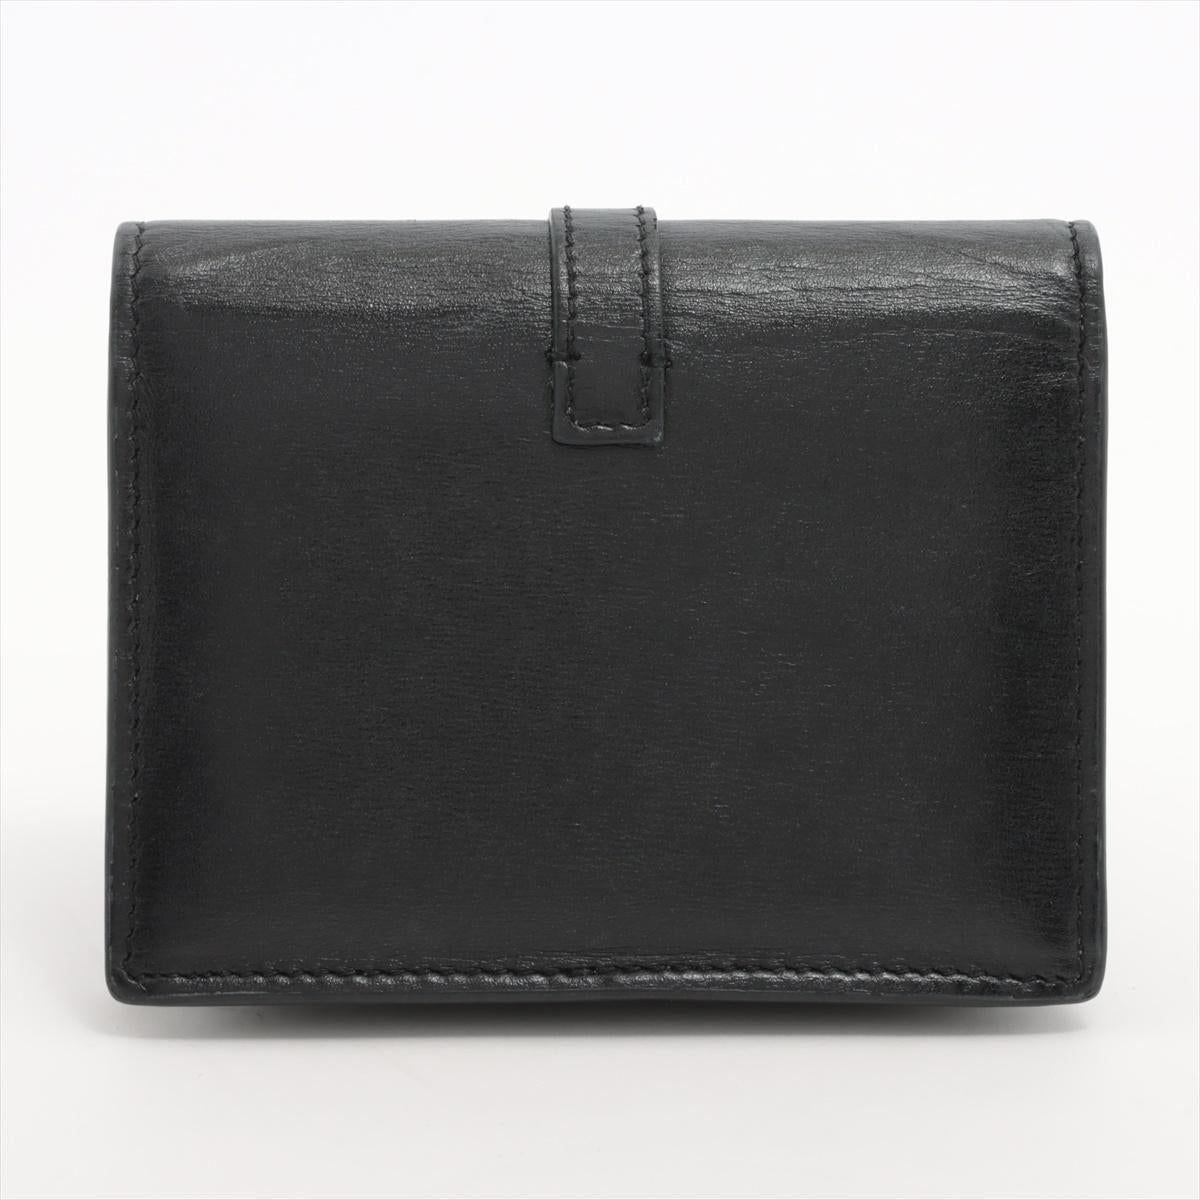 Saint Laurent Double V Flap Short Leather Wallet In Good Condition For Sale In Indianapolis, IN